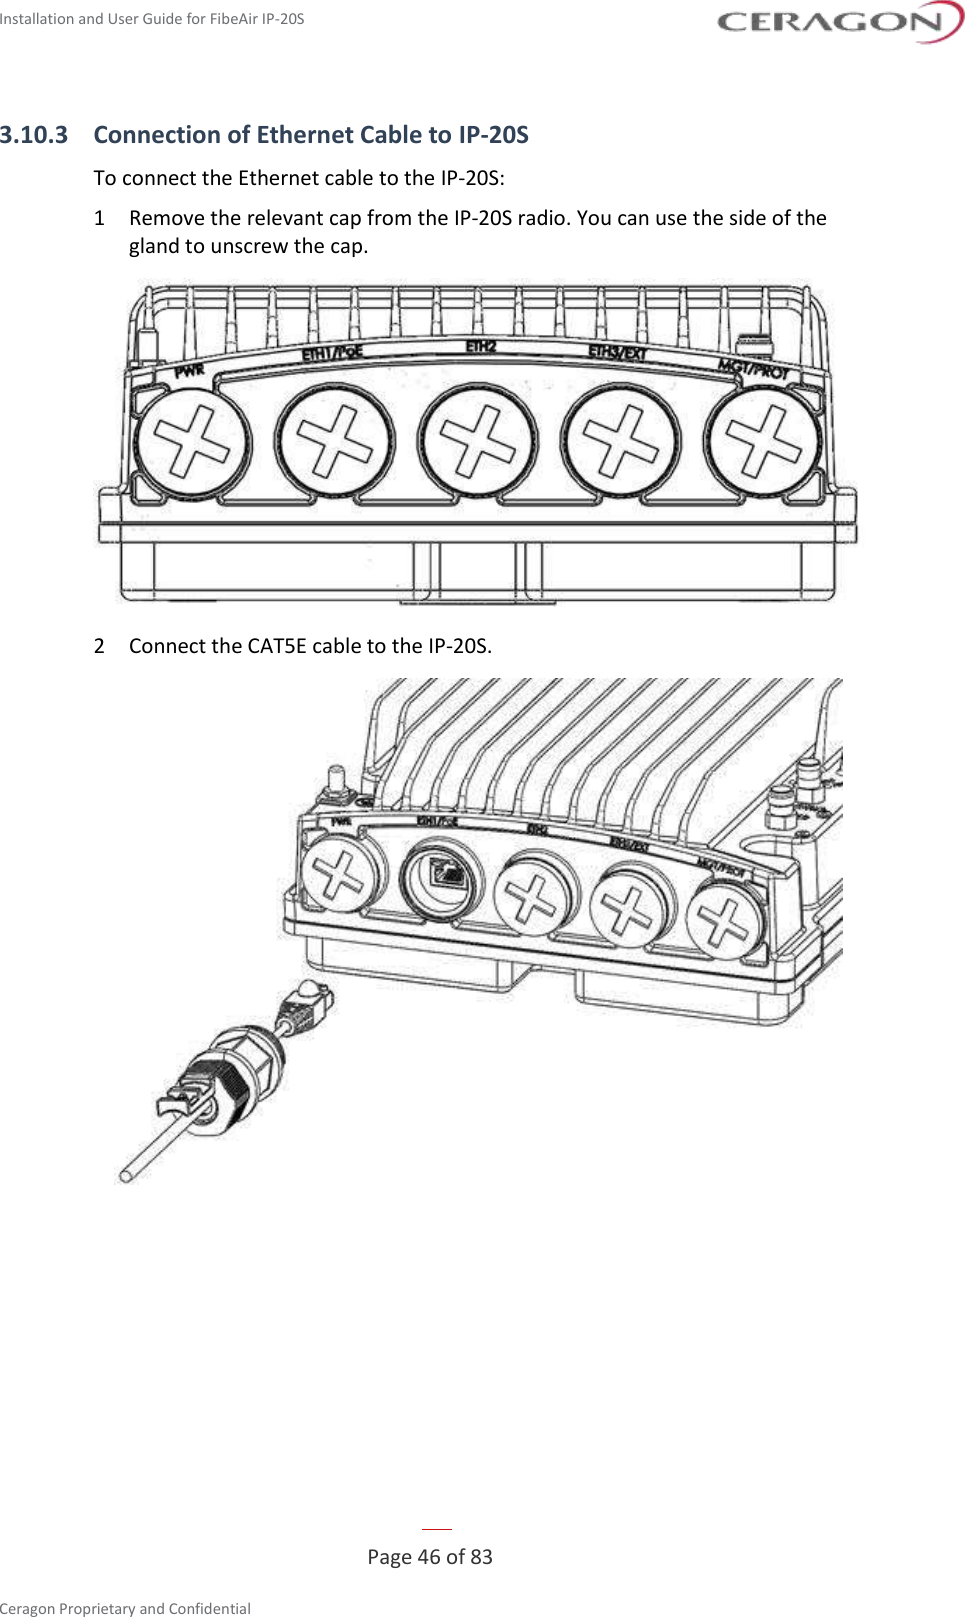 Installation and User Guide for FibeAir IP-20S   Page 46 of 83  Ceragon Proprietary and Confidential     3.10.3 Connection of Ethernet Cable to IP-20S To connect the Ethernet cable to the IP-20S: 1  Remove the relevant cap from the IP-20S radio. You can use the side of the gland to unscrew the cap.  2  Connect the CAT5E cable to the IP-20S.  